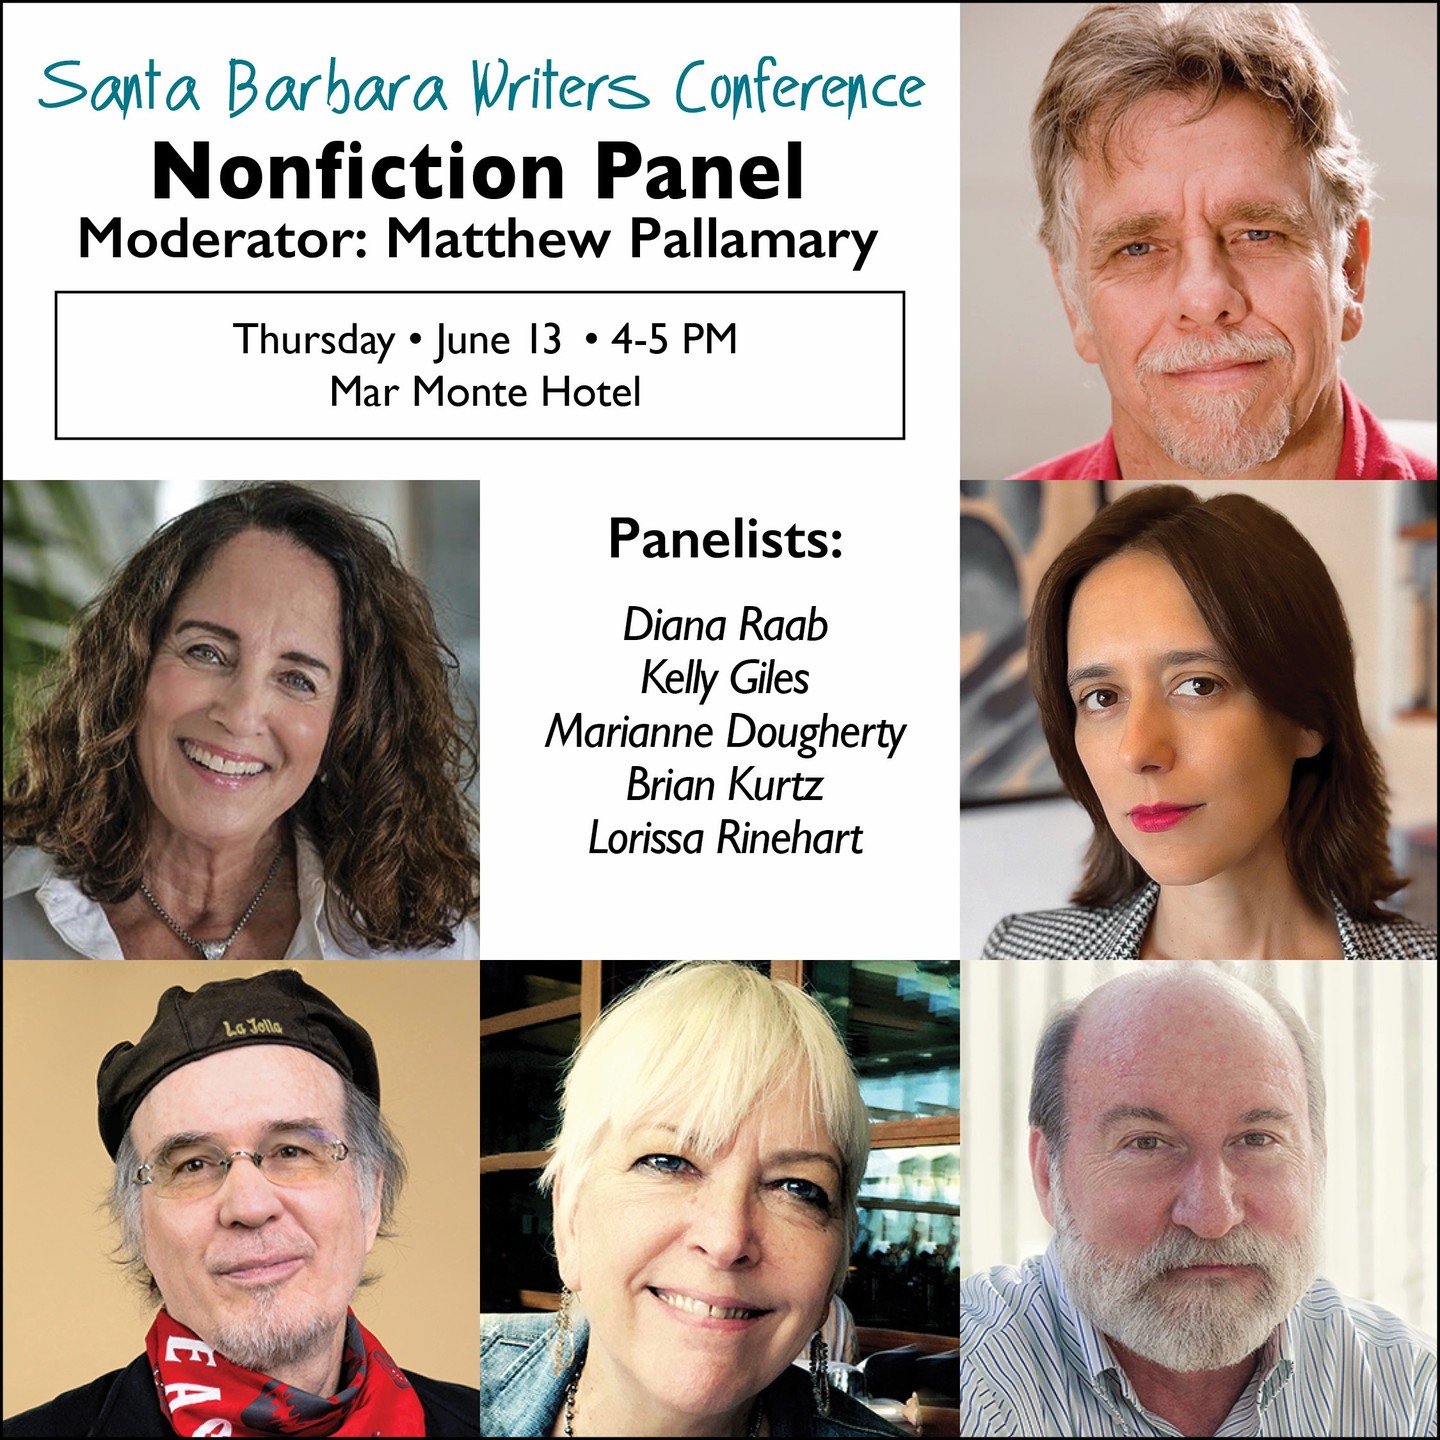 Are you working on a memoir or another nonfiction project? This panel discussion will cover many aspects of creating and selling a successful project.